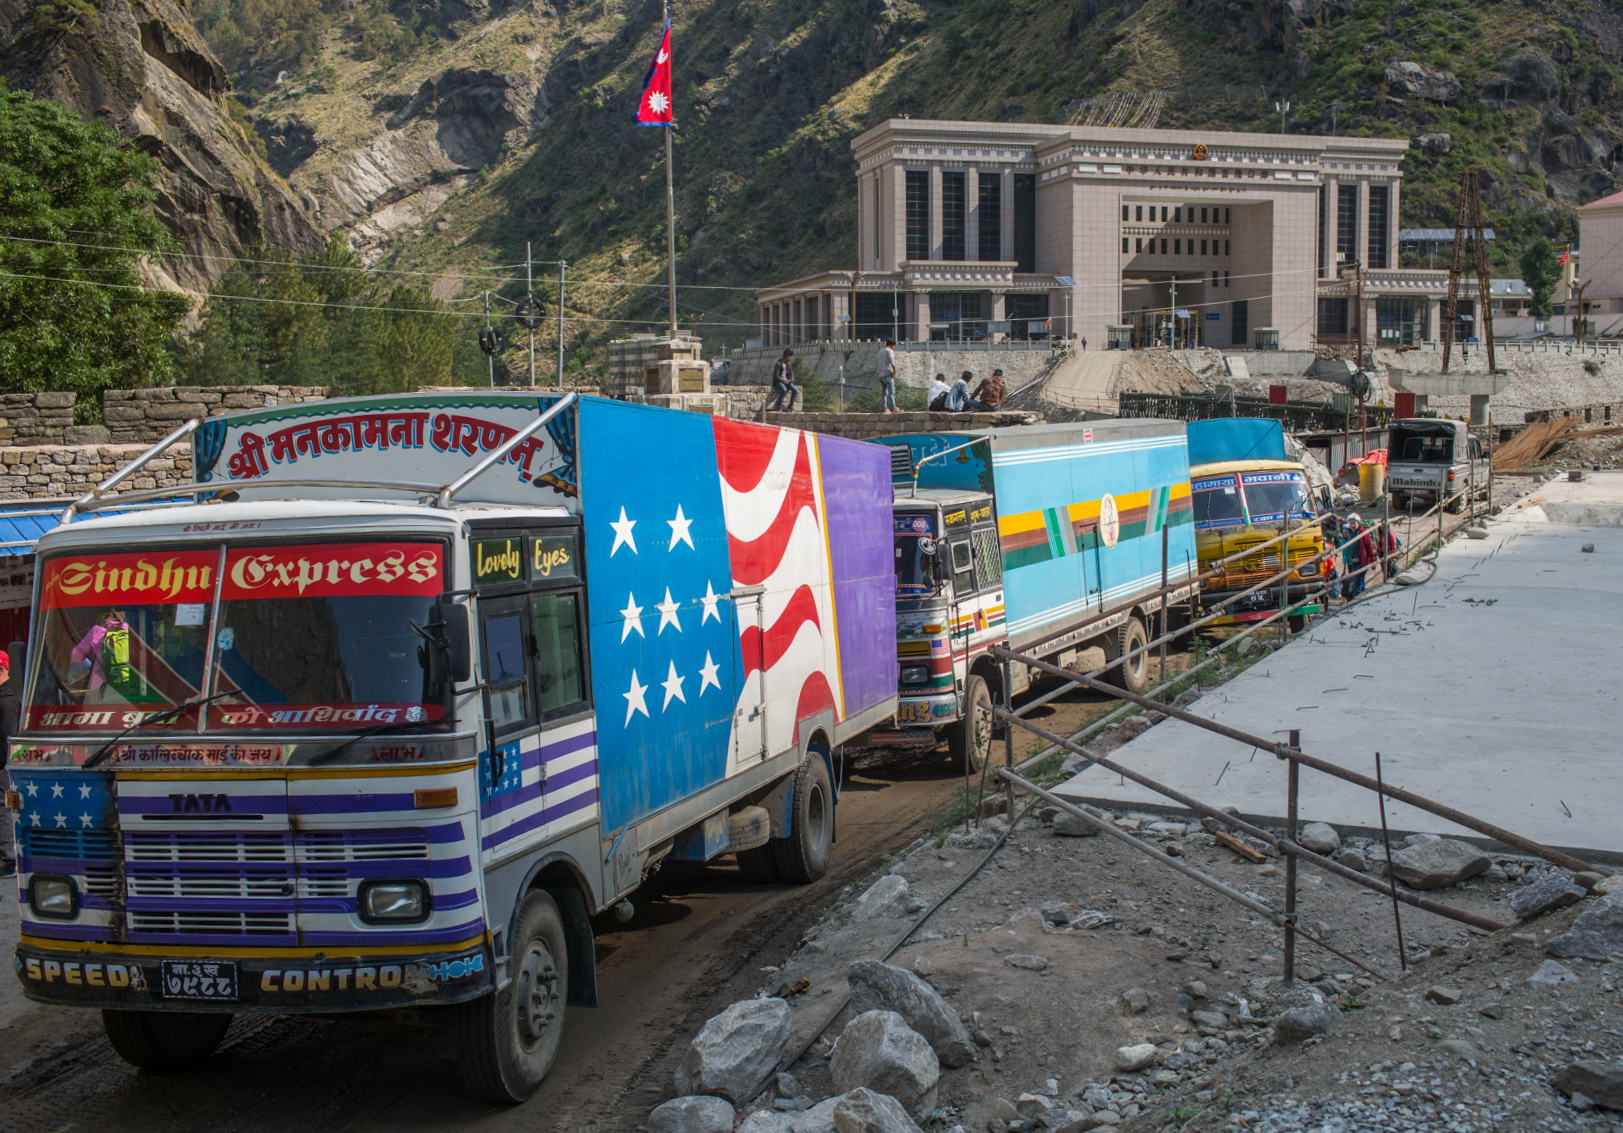 <p>Trucks entering Nepal from China at Rasuwa Gadhi inland port. The Chinese Customs and Immigration office is in the background. (Images: Nabin Baral)</p>